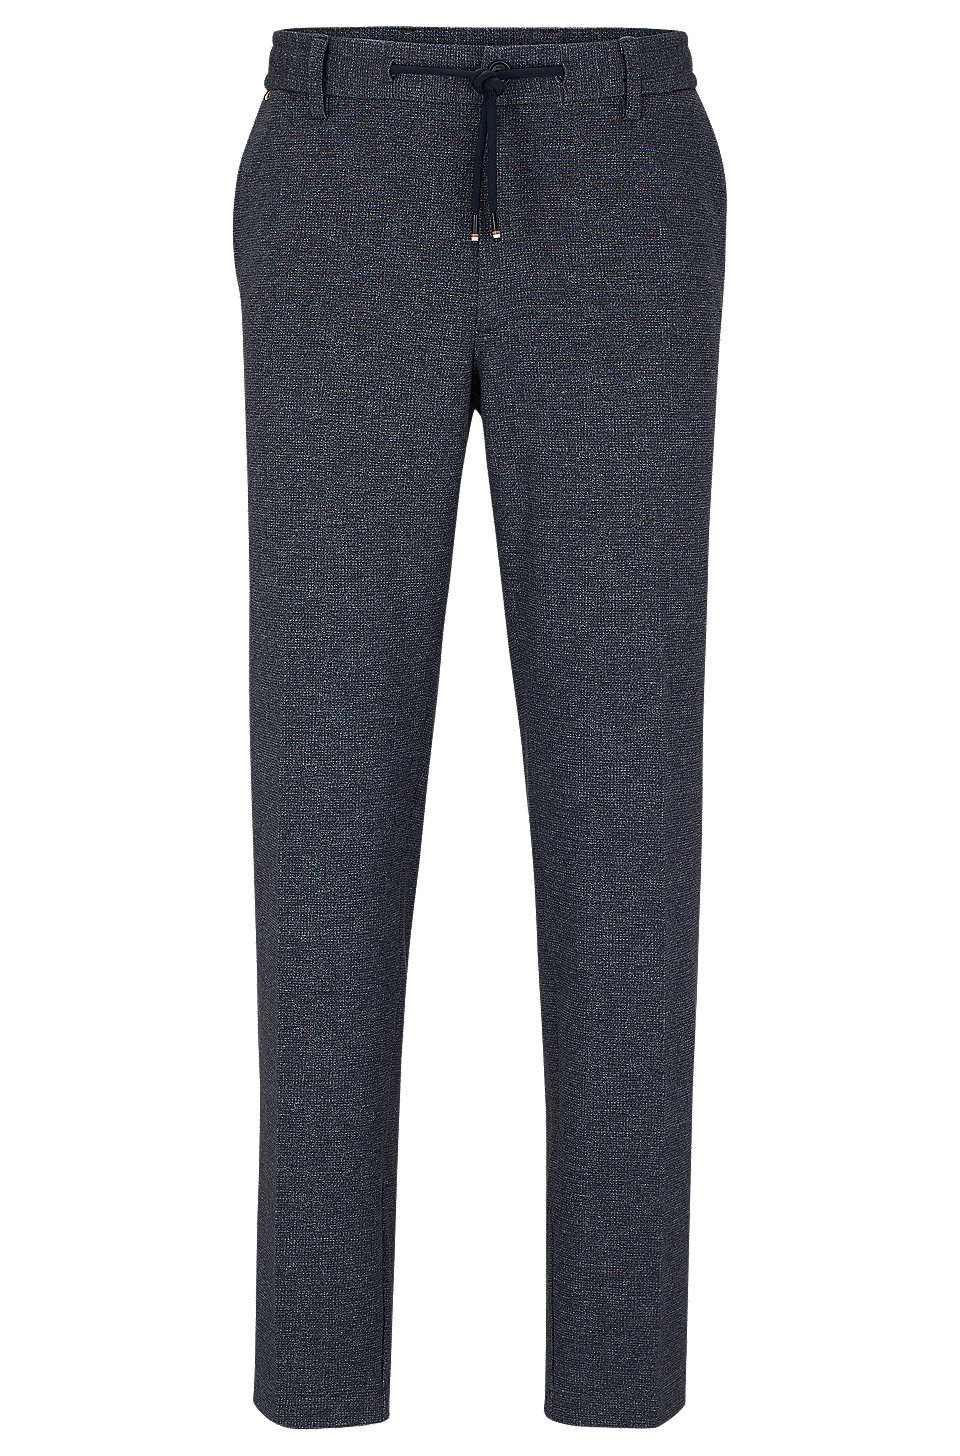 BOSS - Regular-fit trousers in macro-printed stretch jersey